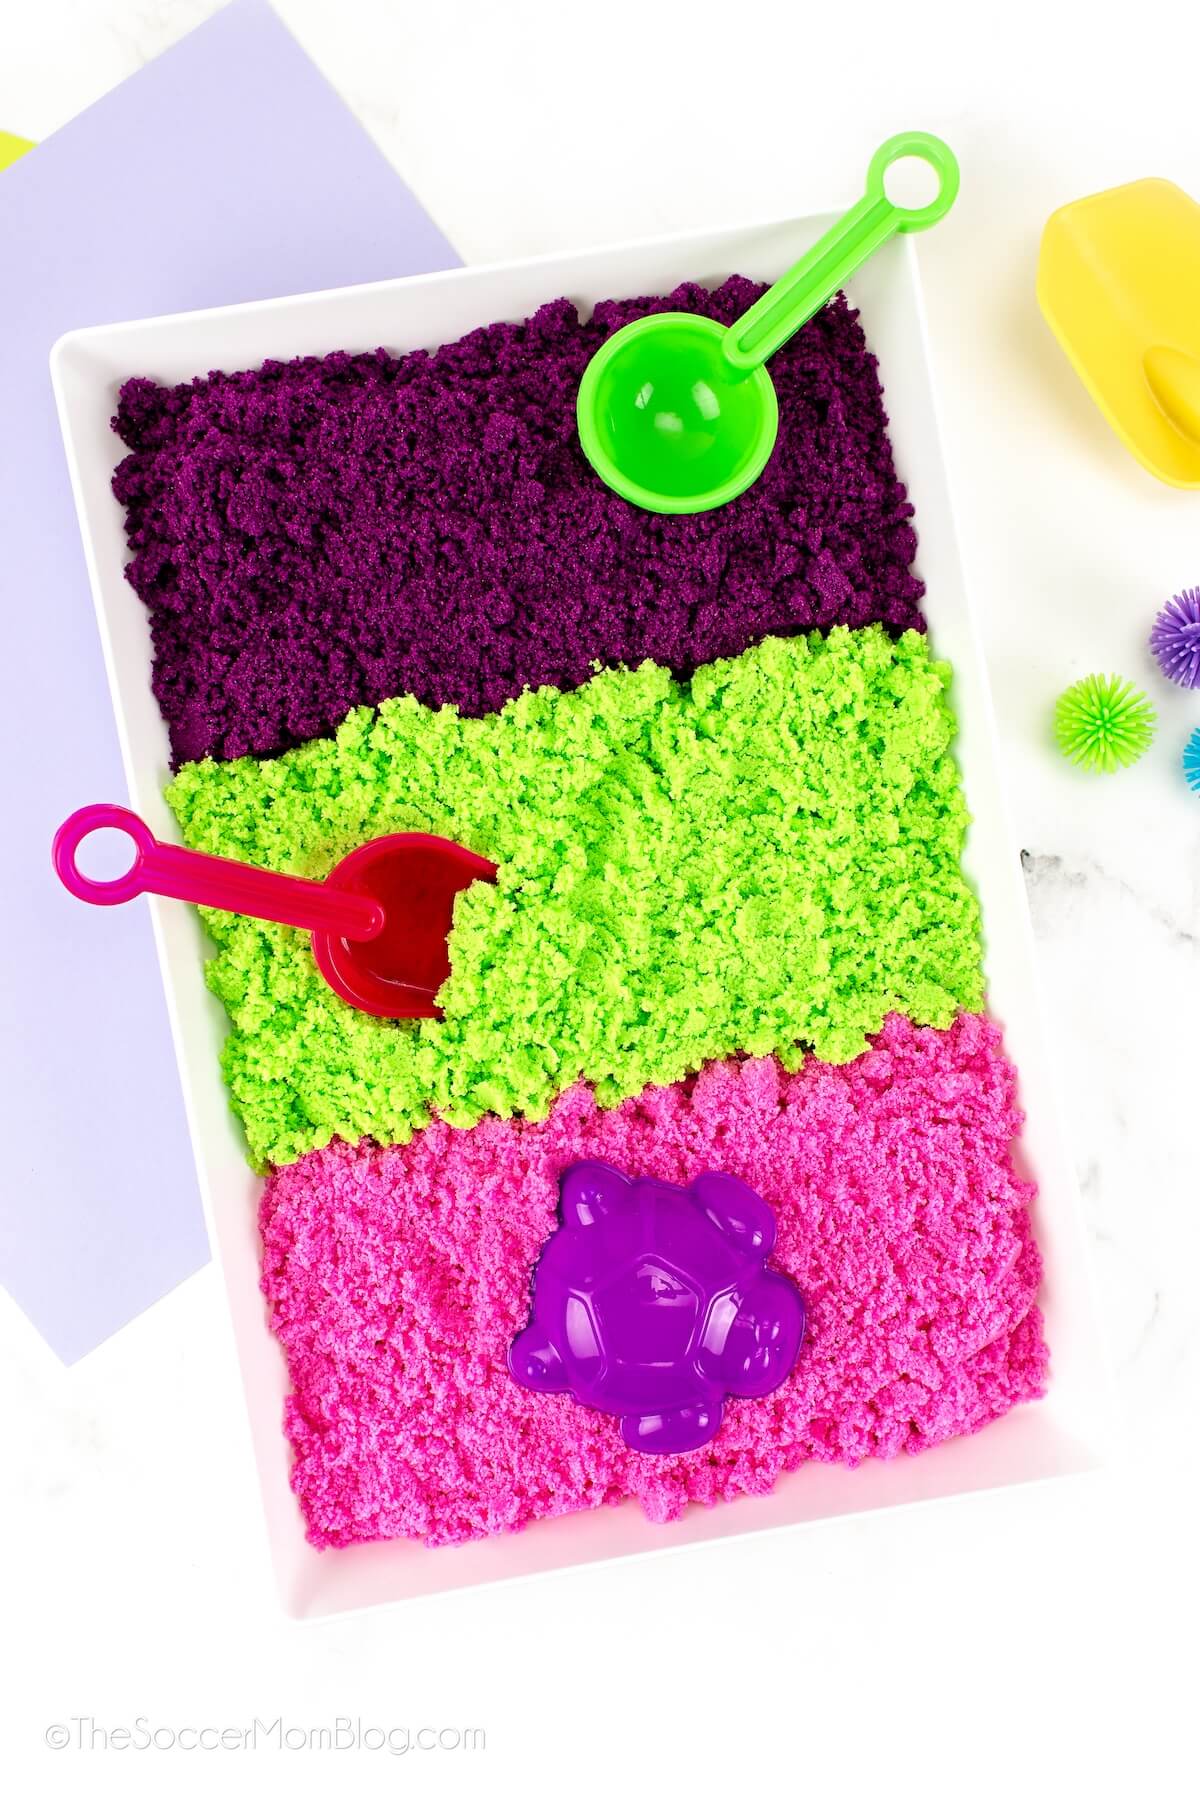 plastic play tray with 3 colors of homemade kinetic sand: purple, green, and pink